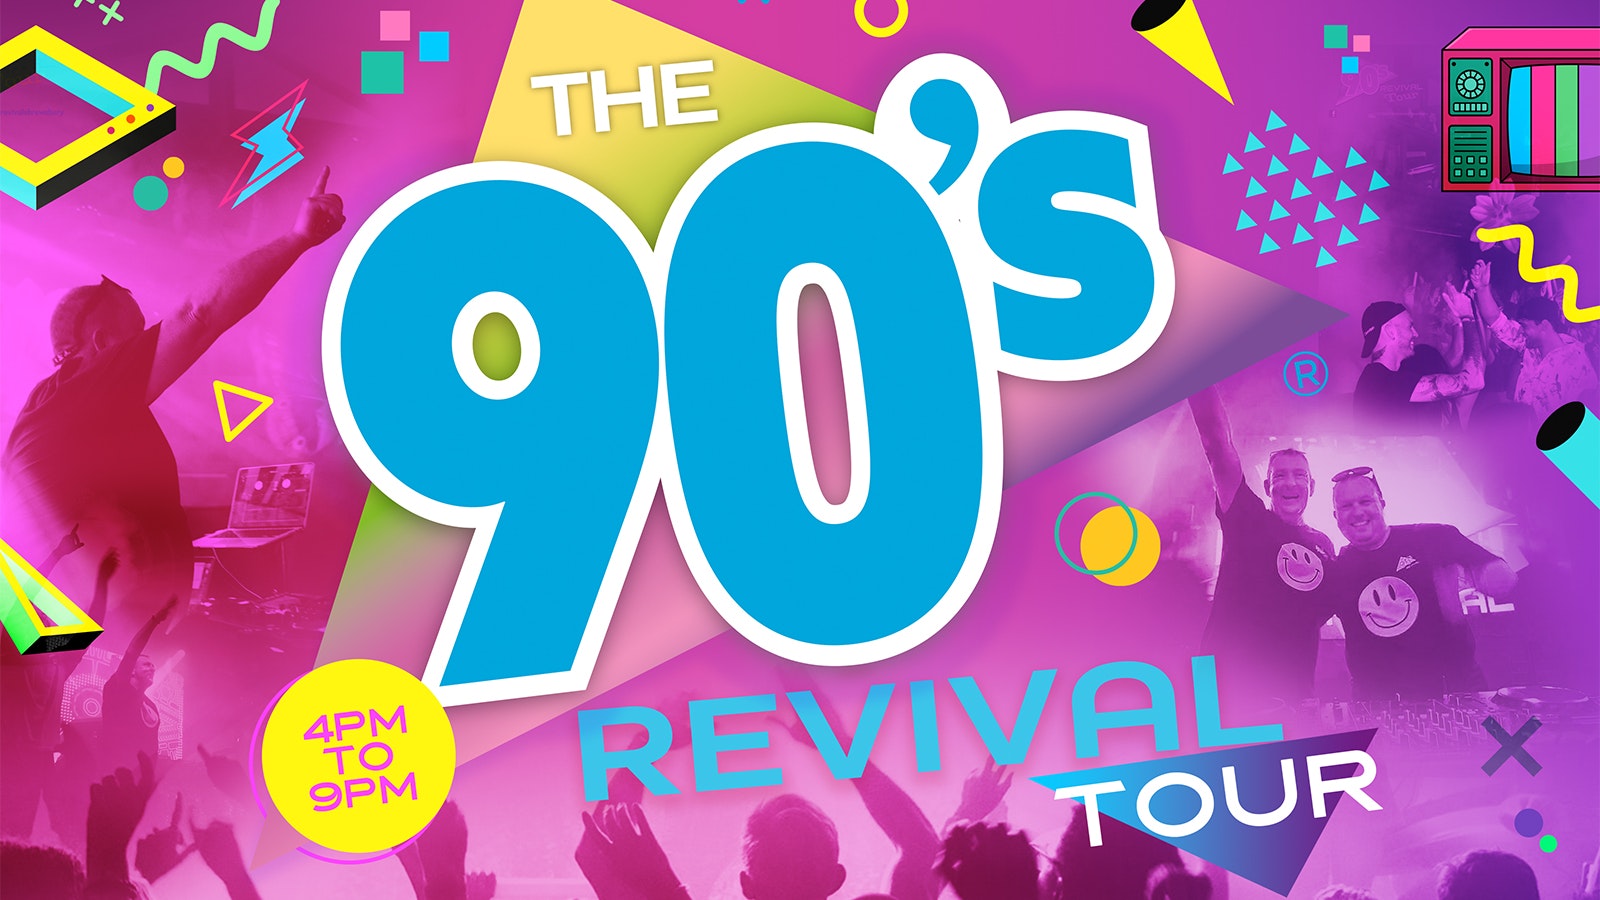 The BIG 90s REVIVAL Tour 4pm-9pm – THE ULTIMATE ALL DAY FEEL GOOD PARTY!